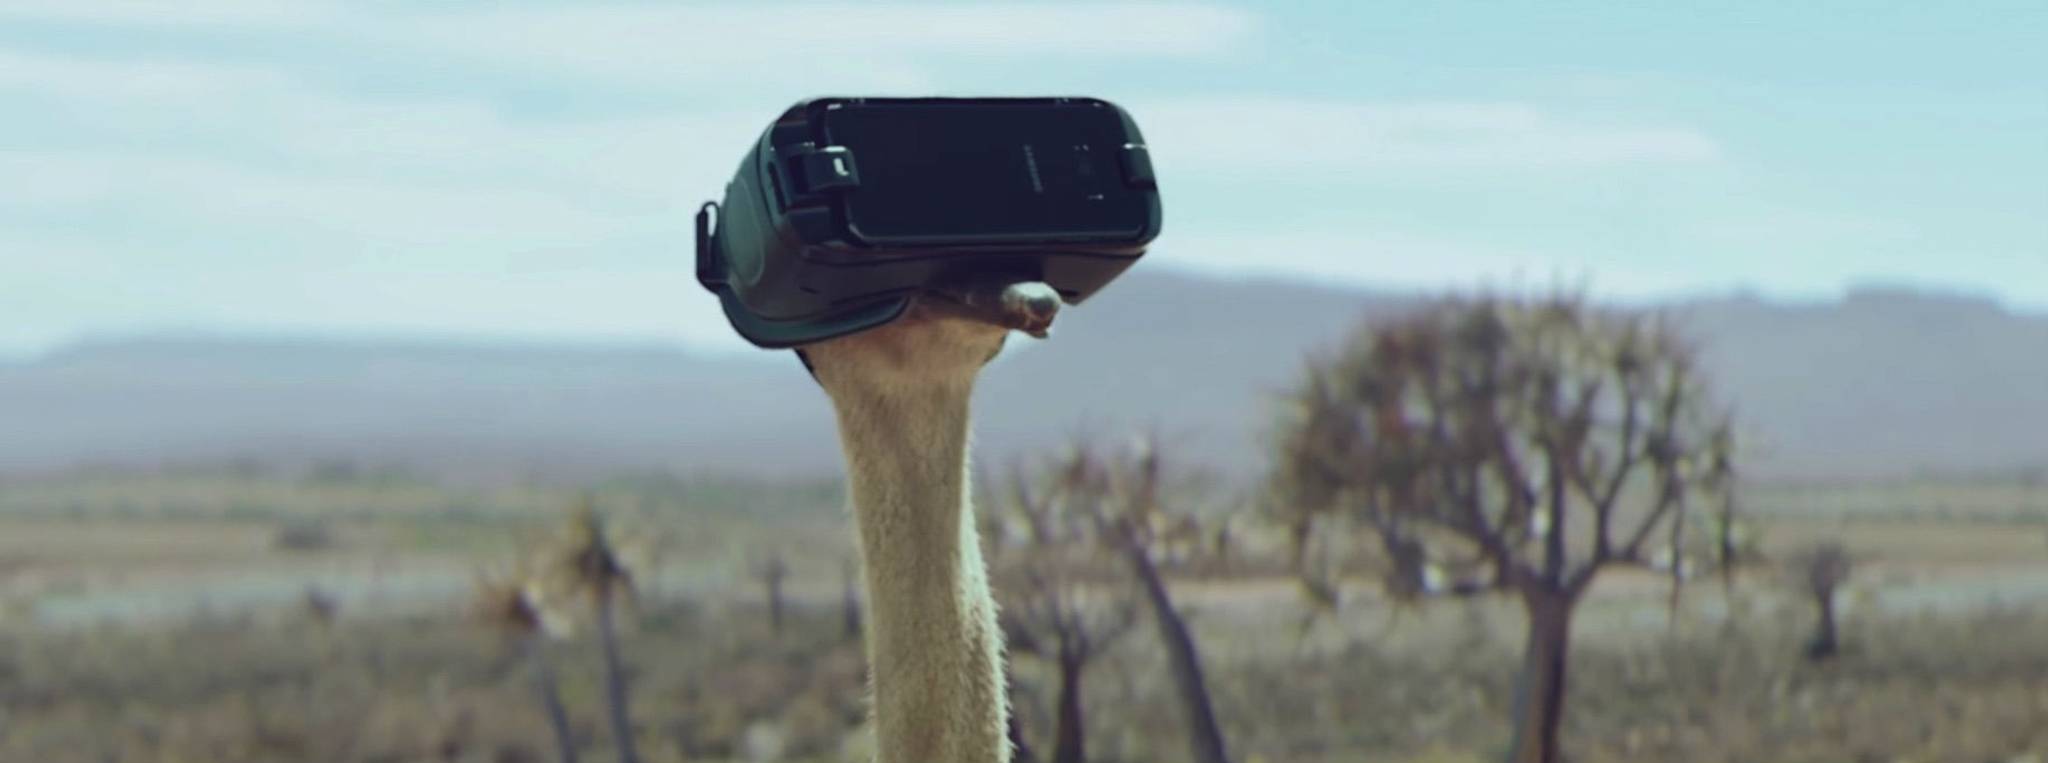 Samsung ad demonstrates the possibilities of VR